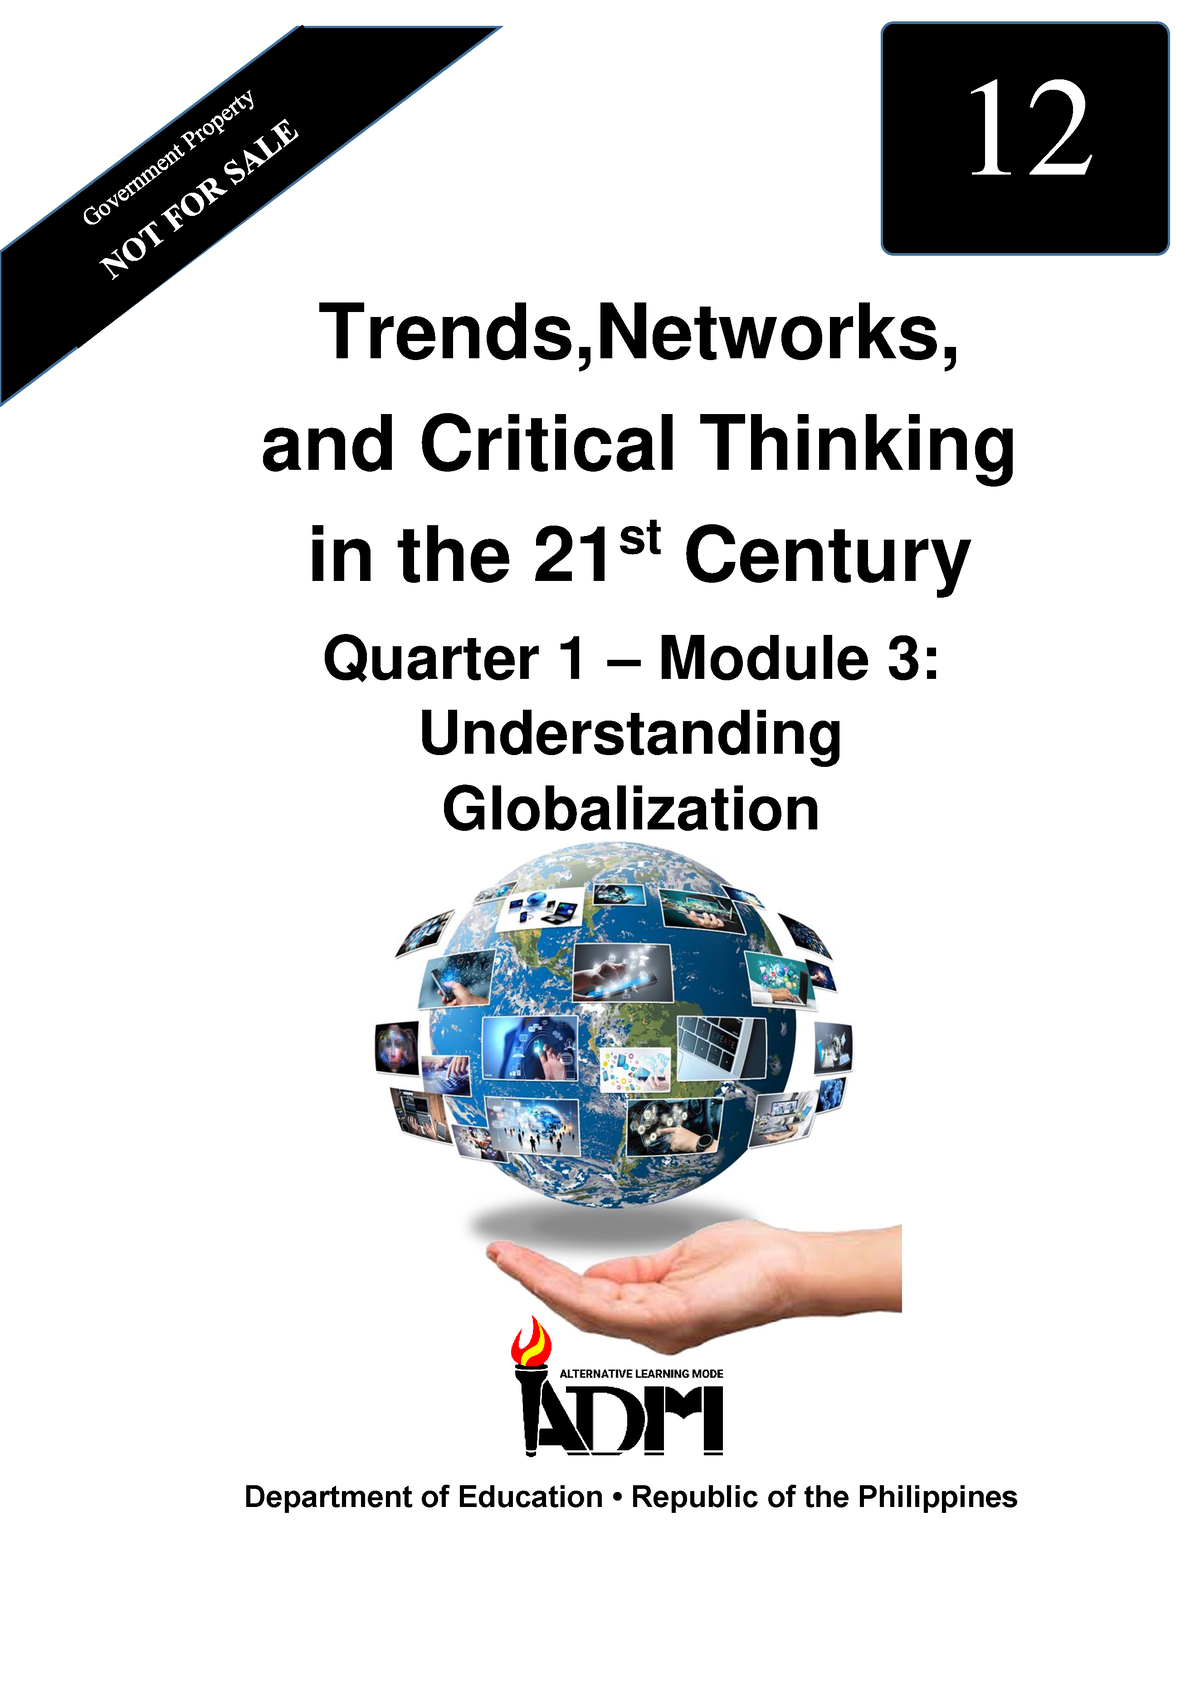 reflection about trends and critical thinking in the 21st century